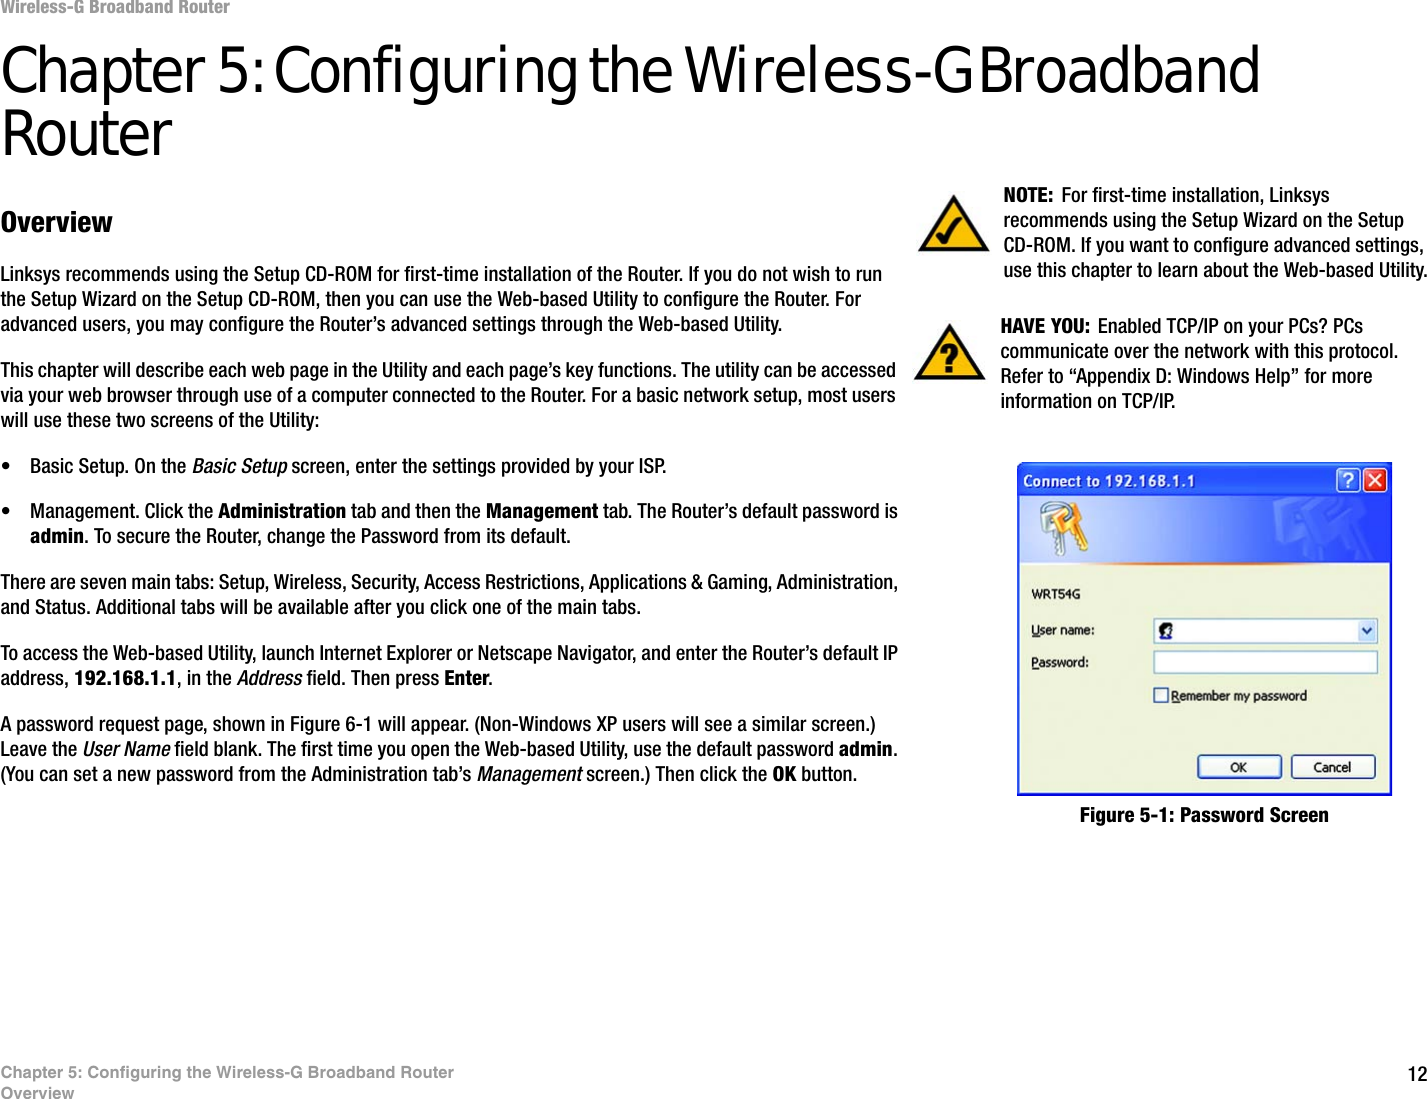 12Chapter 5: Configuring the Wireless-G Broadband RouterOverviewWireless-G Broadband RouterChapter 5: Configuring the Wireless-G Broadband RouterOverviewLinksys recommends using the Setup CD-ROM for first-time installation of the Router. If you do not wish to run the Setup Wizard on the Setup CD-ROM, then you can use the Web-based Utility to configure the Router. For advanced users, you may configure the Router’s advanced settings through the Web-based Utility.This chapter will describe each web page in the Utility and each page’s key functions. The utility can be accessed via your web browser through use of a computer connected to the Router. For a basic network setup, most users will use these two screens of the Utility:• Basic Setup. On the Basic Setup screen, enter the settings provided by your ISP.• Management. Click the Administration tab and then the Management tab. The Router’s default password is admin. To secure the Router, change the Password from its default.There are seven main tabs: Setup, Wireless, Security, Access Restrictions, Applications &amp; Gaming, Administration, and Status. Additional tabs will be available after you click one of the main tabs.To access the Web-based Utility, launch Internet Explorer or Netscape Navigator, and enter the Router’s default IP address, 192.168.1.1, in the Address field. Then press Enter. A password request page, shown in Figure 6-1 will appear. (Non-Windows XP users will see a similar screen.) Leave the User Name field blank. The first time you open the Web-based Utility, use the default password admin. (You can set a new password from the Administration tab’s Management screen.) Then click the OK button. HAVE YOU:  Enabled TCP/IP on your PCs? PCs communicate over the network with this protocol. Refer to “Appendix D: Windows Help” for more information on TCP/IP.NOTE: For first-time installation, Linksys recommends using the Setup Wizard on the Setup CD-ROM. If you want to configure advanced settings, use this chapter to learn about the Web-based Utility.Figure 5-1: Password Screen